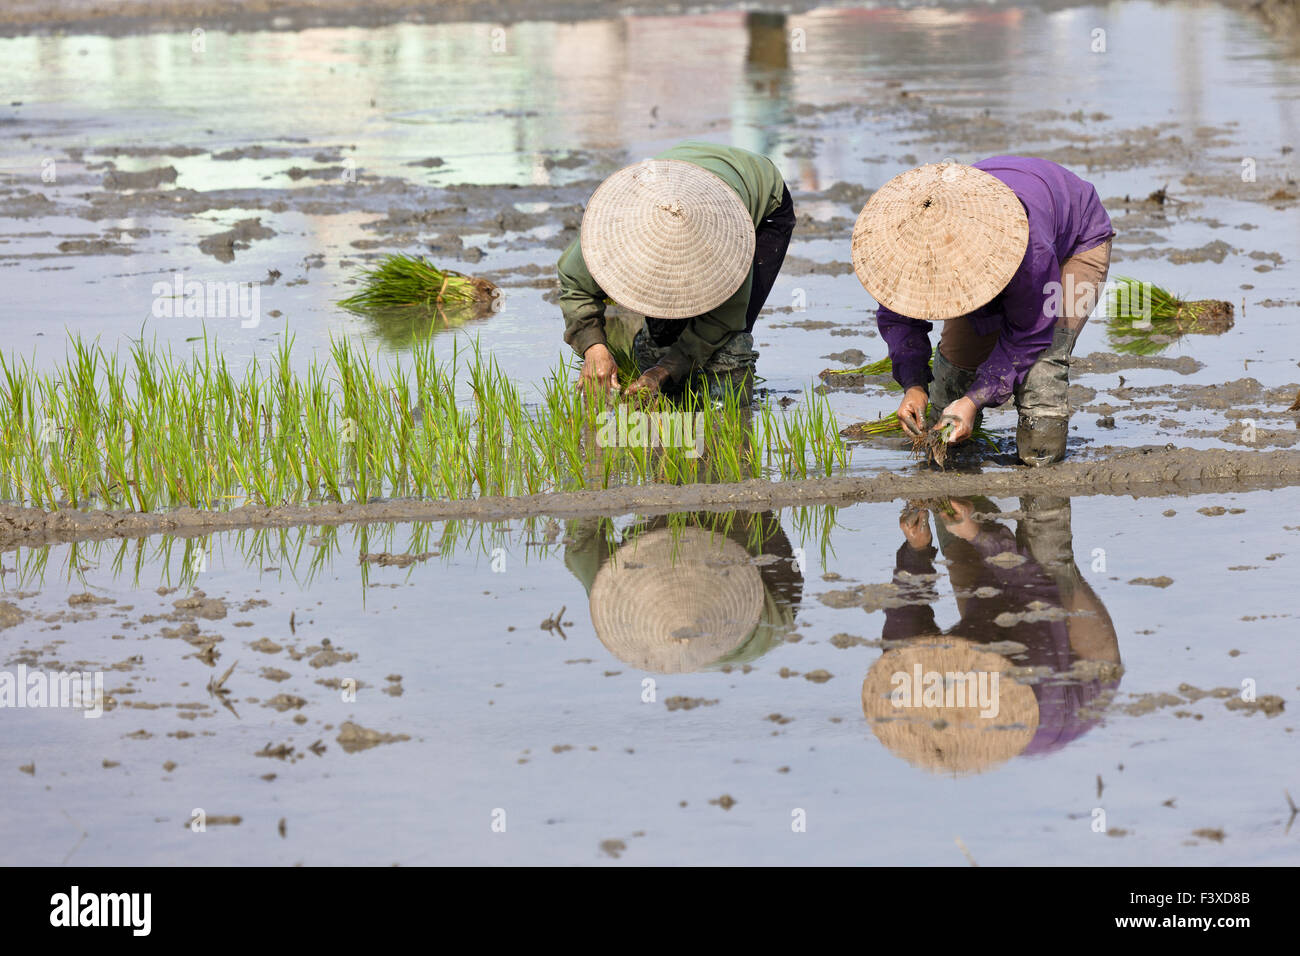 Woman working at the rice field Stock Photo